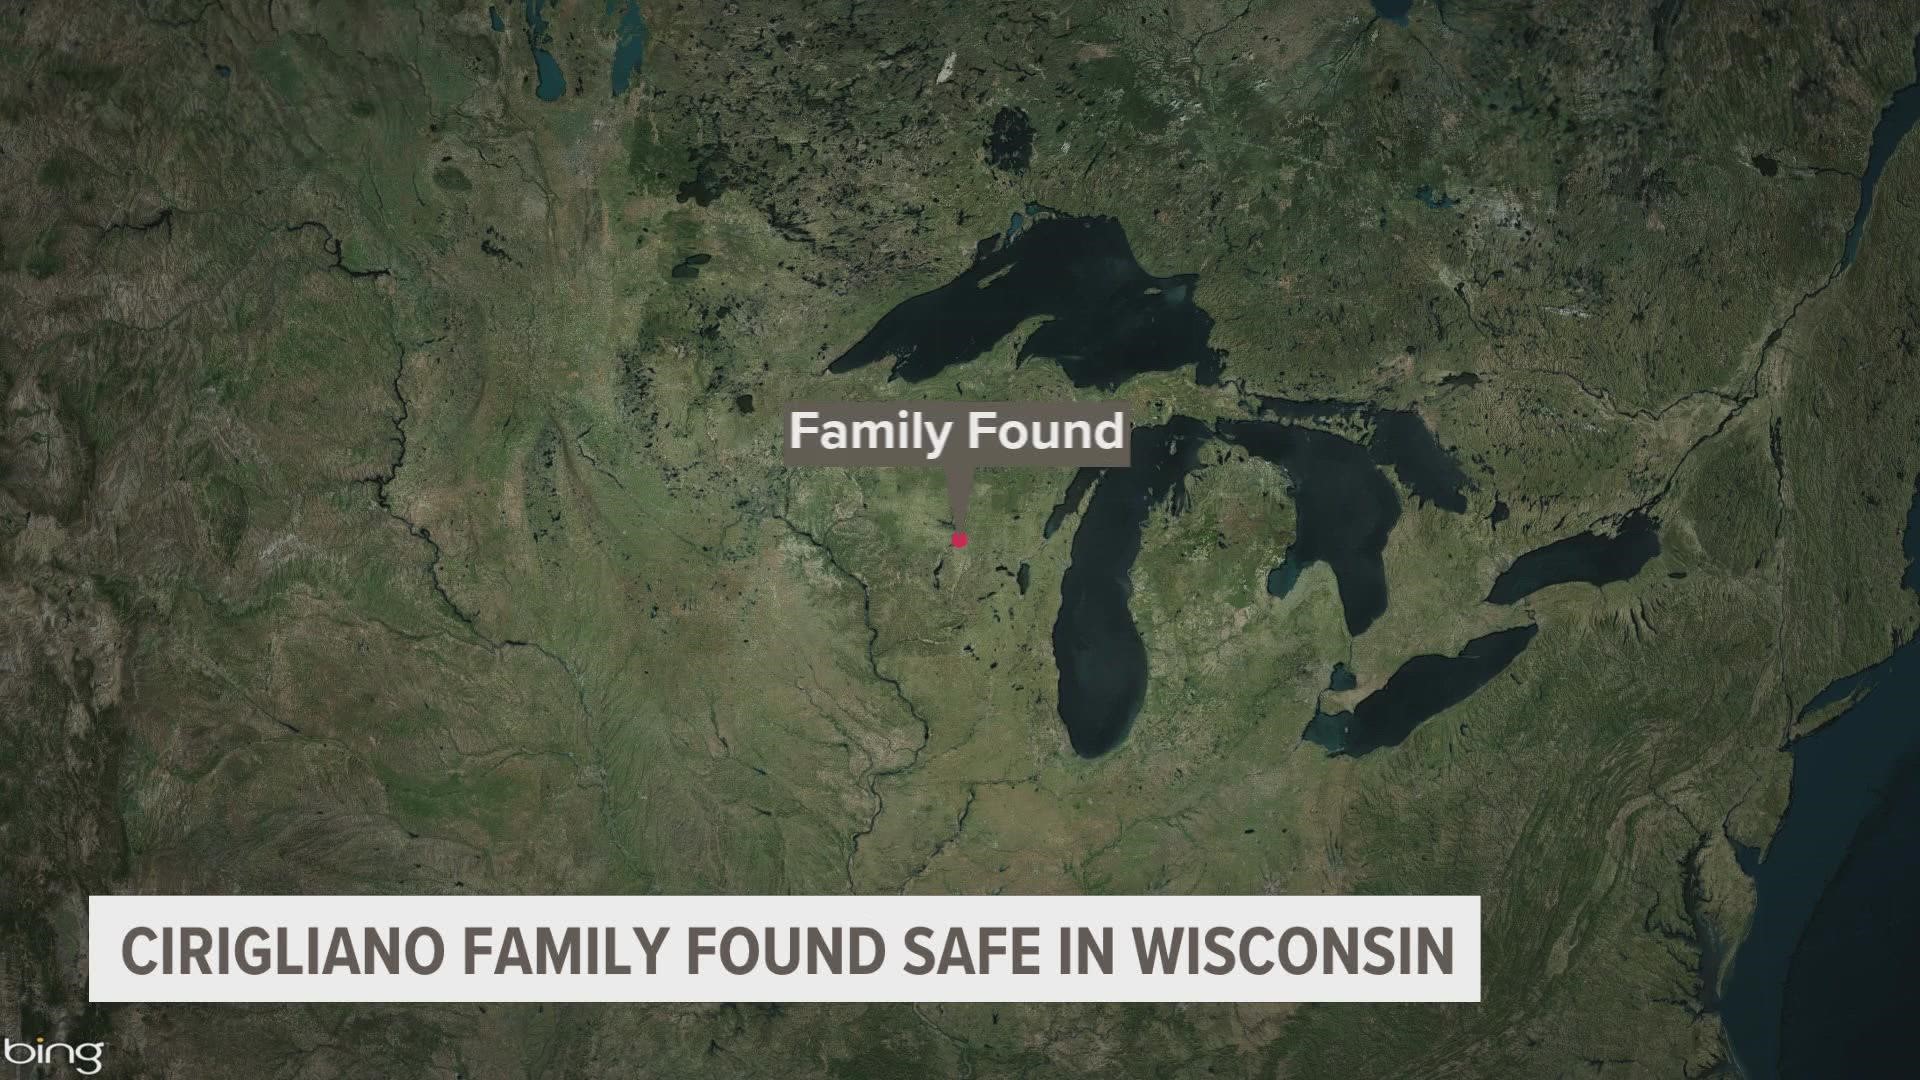 Police contacted the family around 11 a.m. Sunday morning in Steven's Point, Wisconsin, after the Ciriglianos had been missing for a week. Police say they are safe.